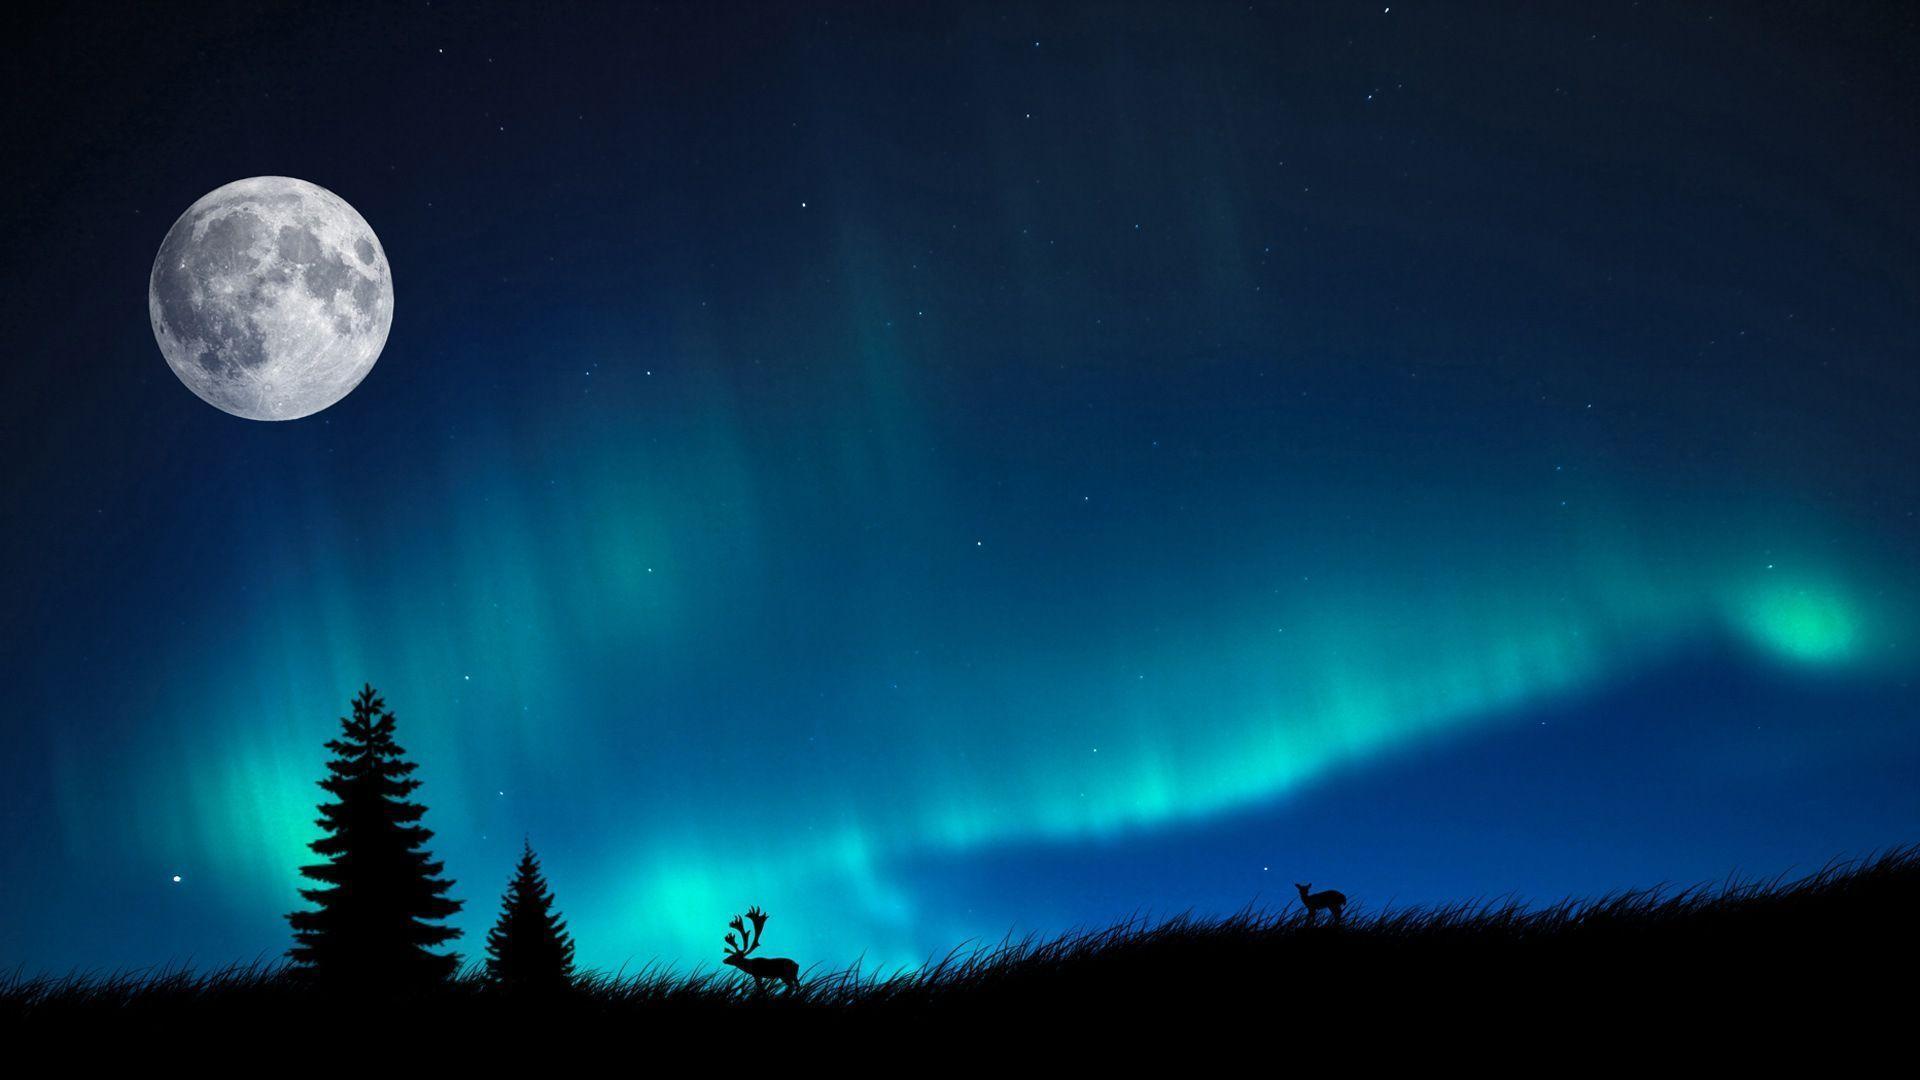 Northern Lights Wallpapers - Wallpaper Cave